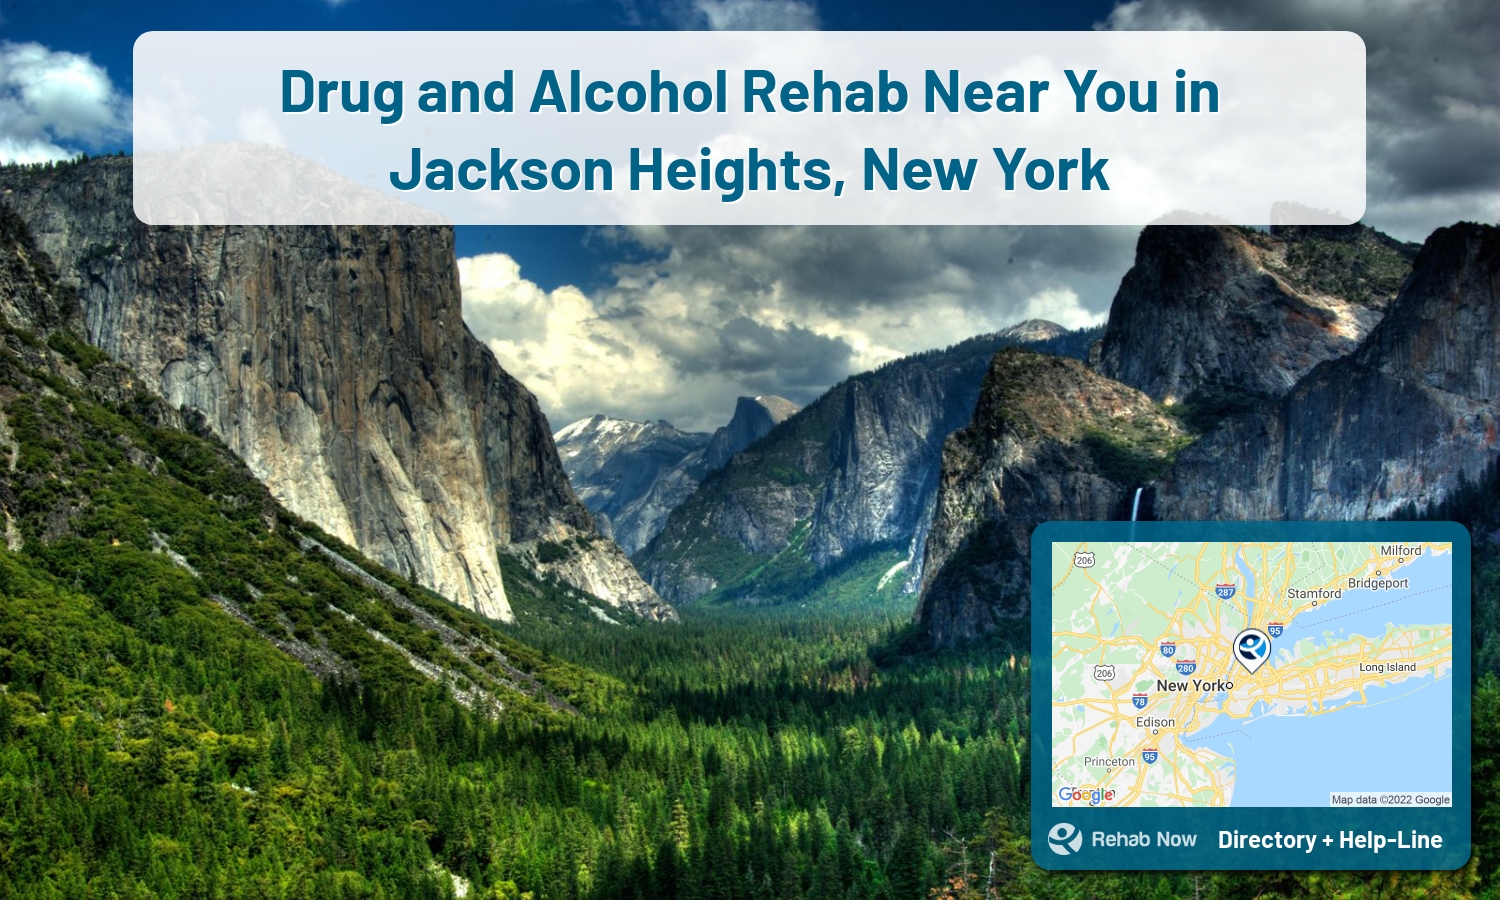 Drug rehab and alcohol treatment services near you in Jackson Heights, New York. Need help choosing a center? Call us, free.